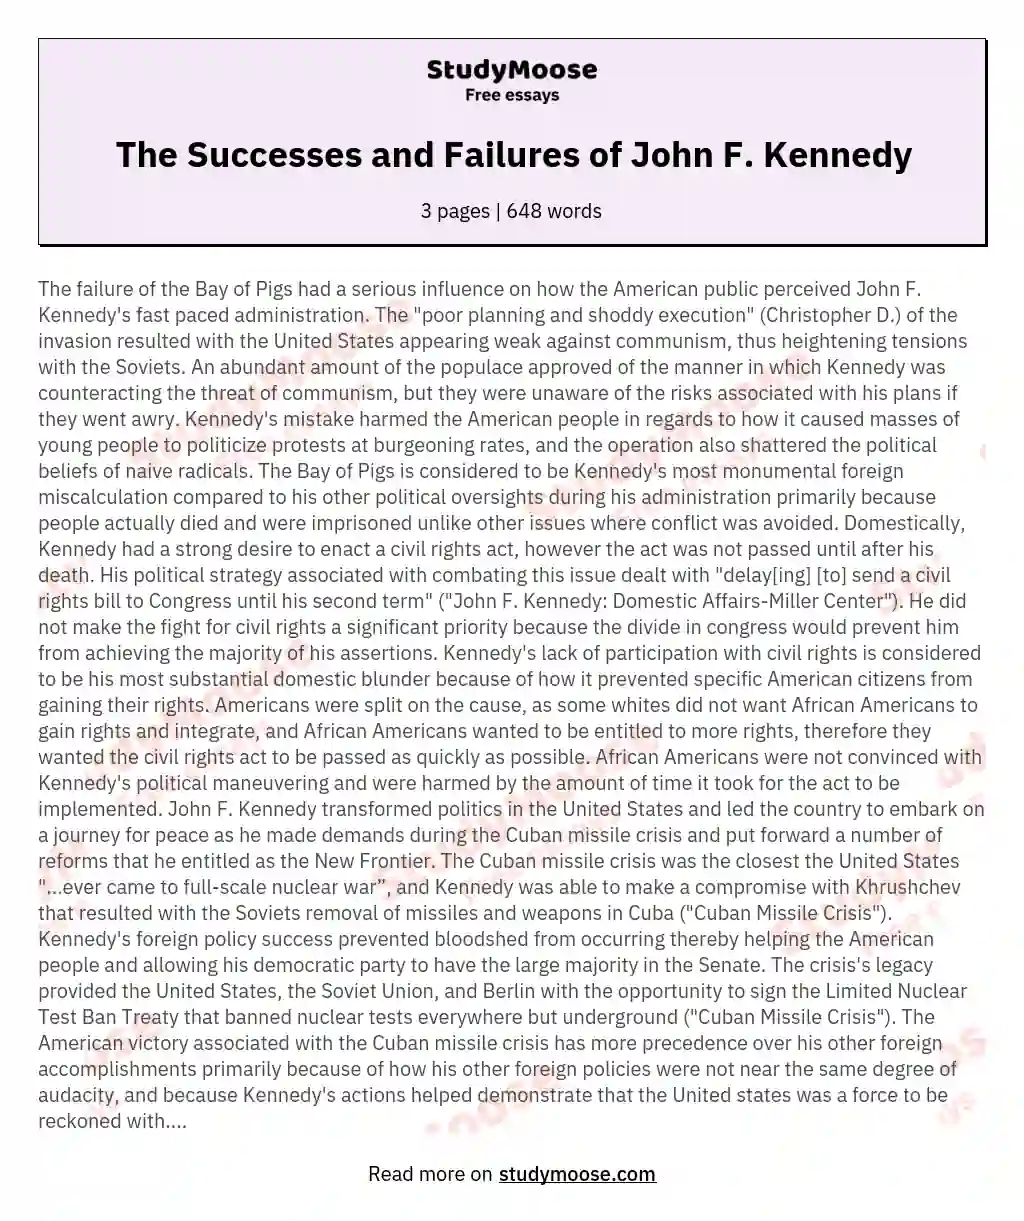 The Successes and Failures of John F. Kennedy essay